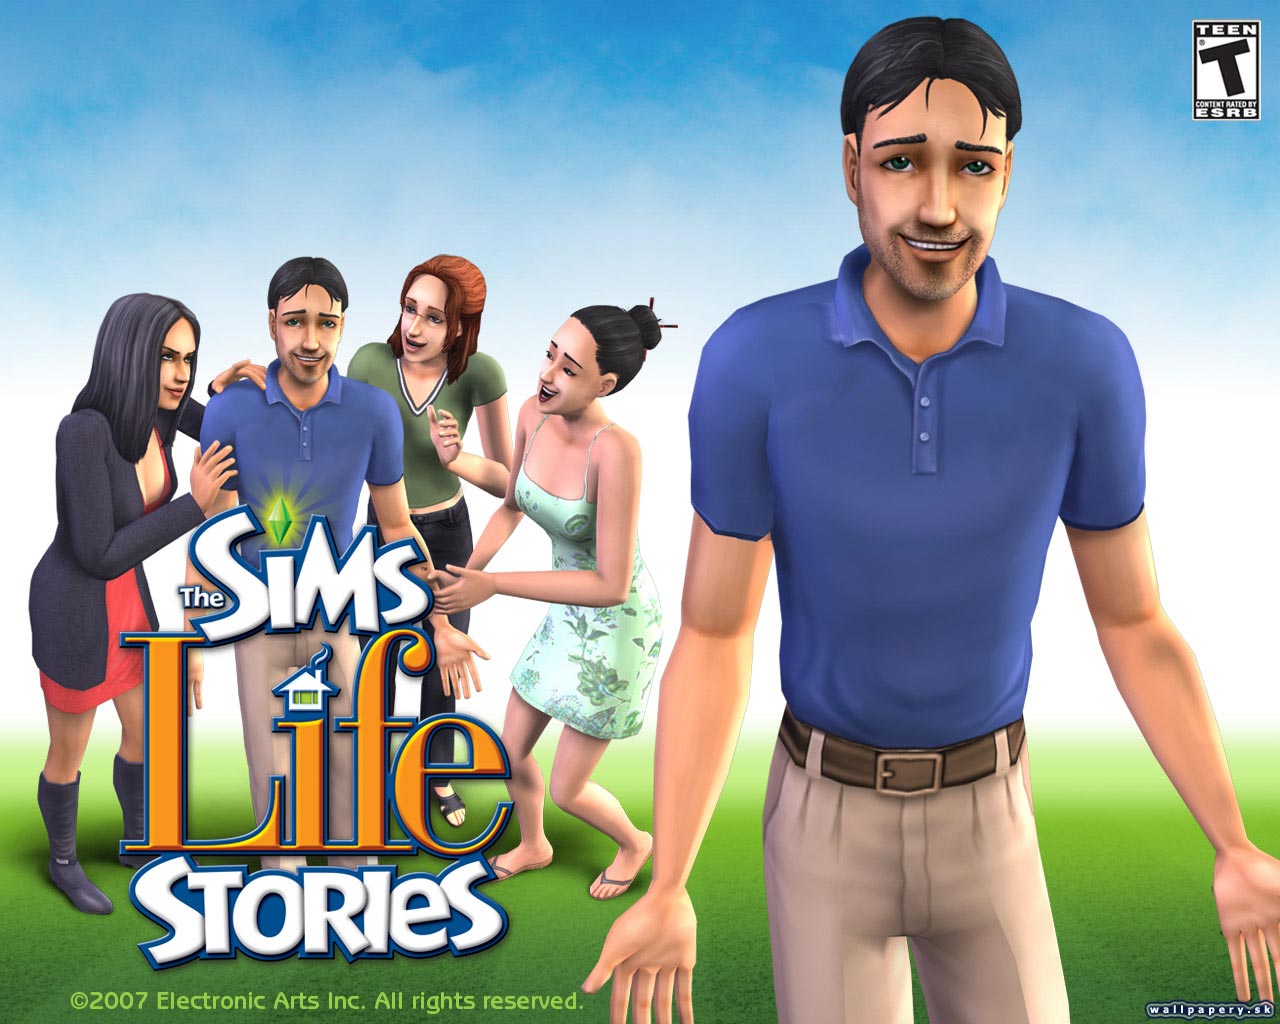 Симс 2 житейские. The SIMS Life stories. Симс 2 Life stories. The SIMS: Life stories (the SIMS житейские истории. Винсент the SIMS.